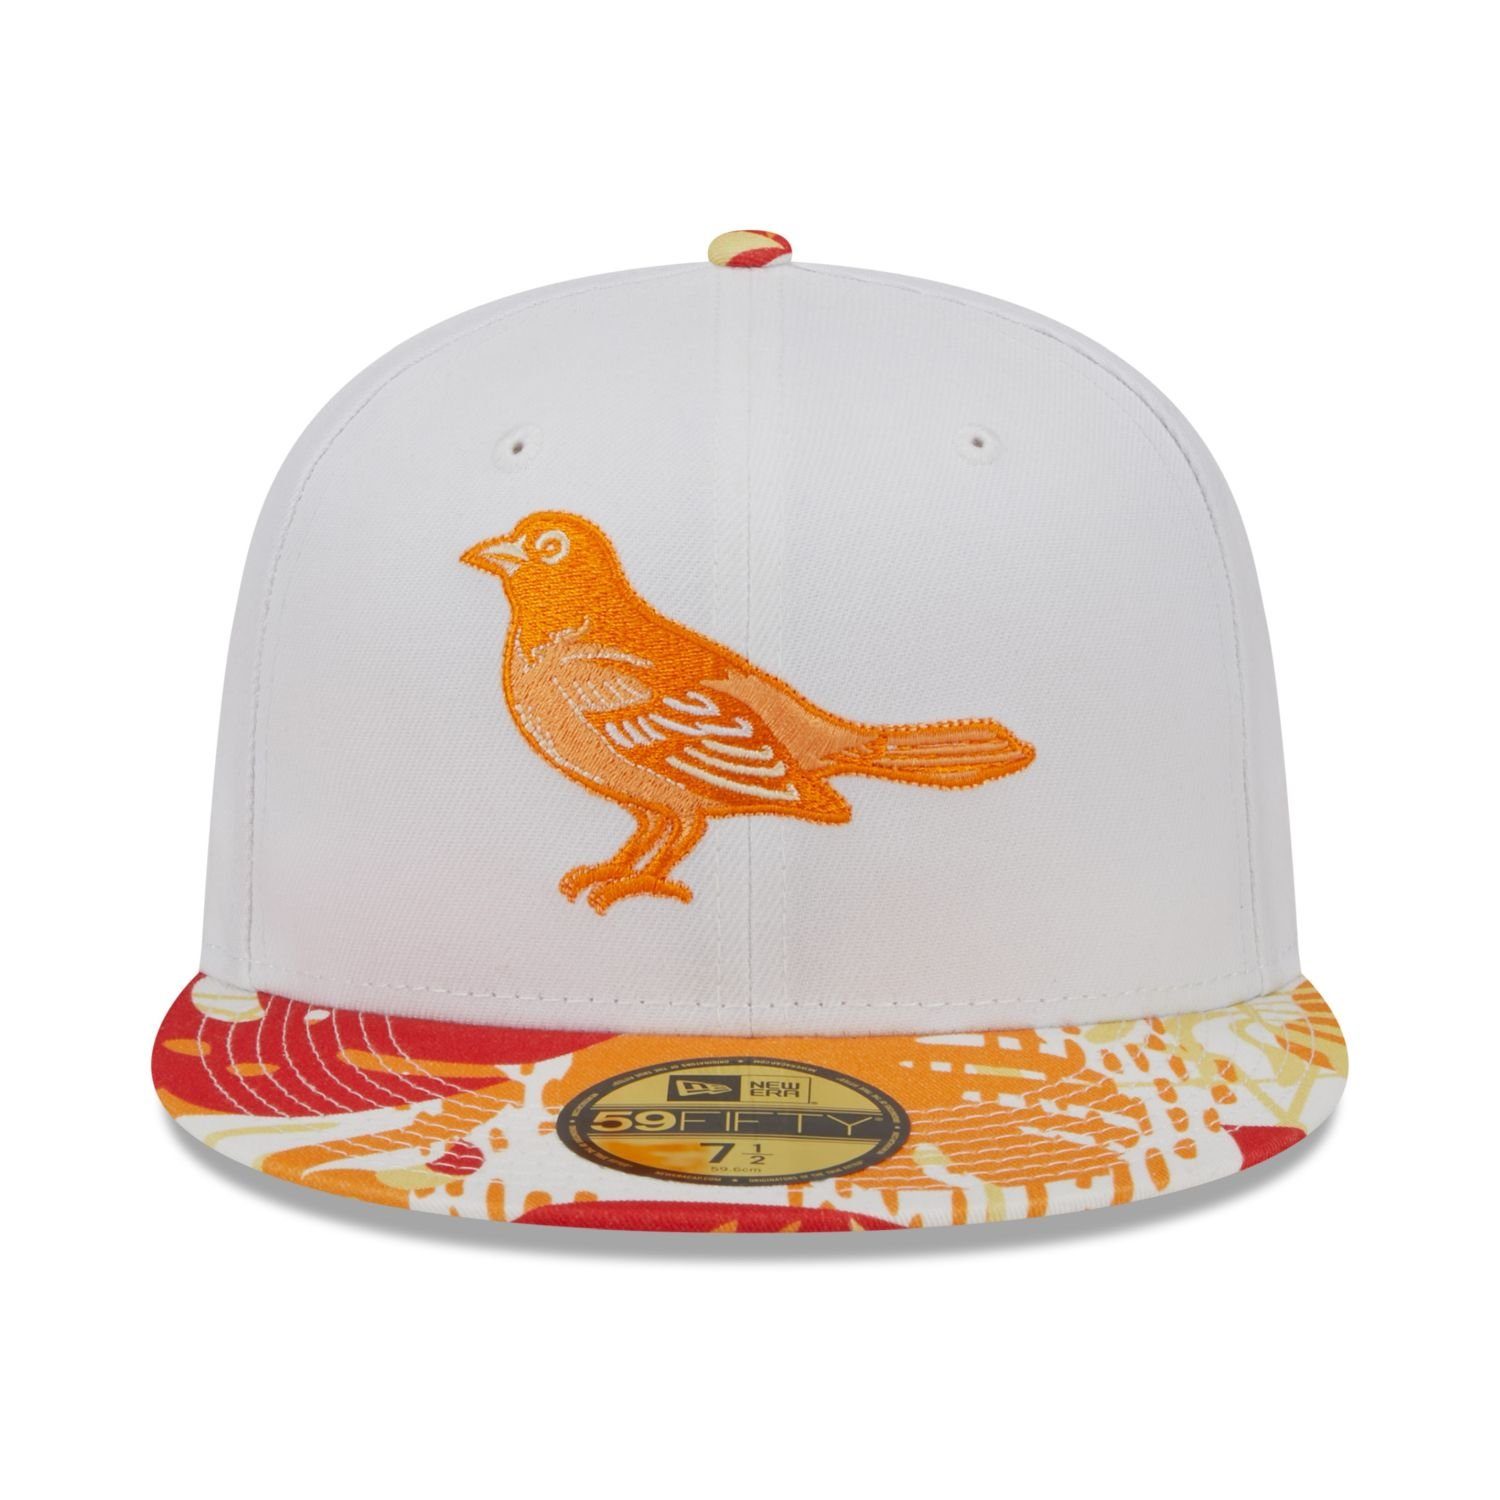 Cap New 59Fifty Orioles Era floral Baltimore Fitted